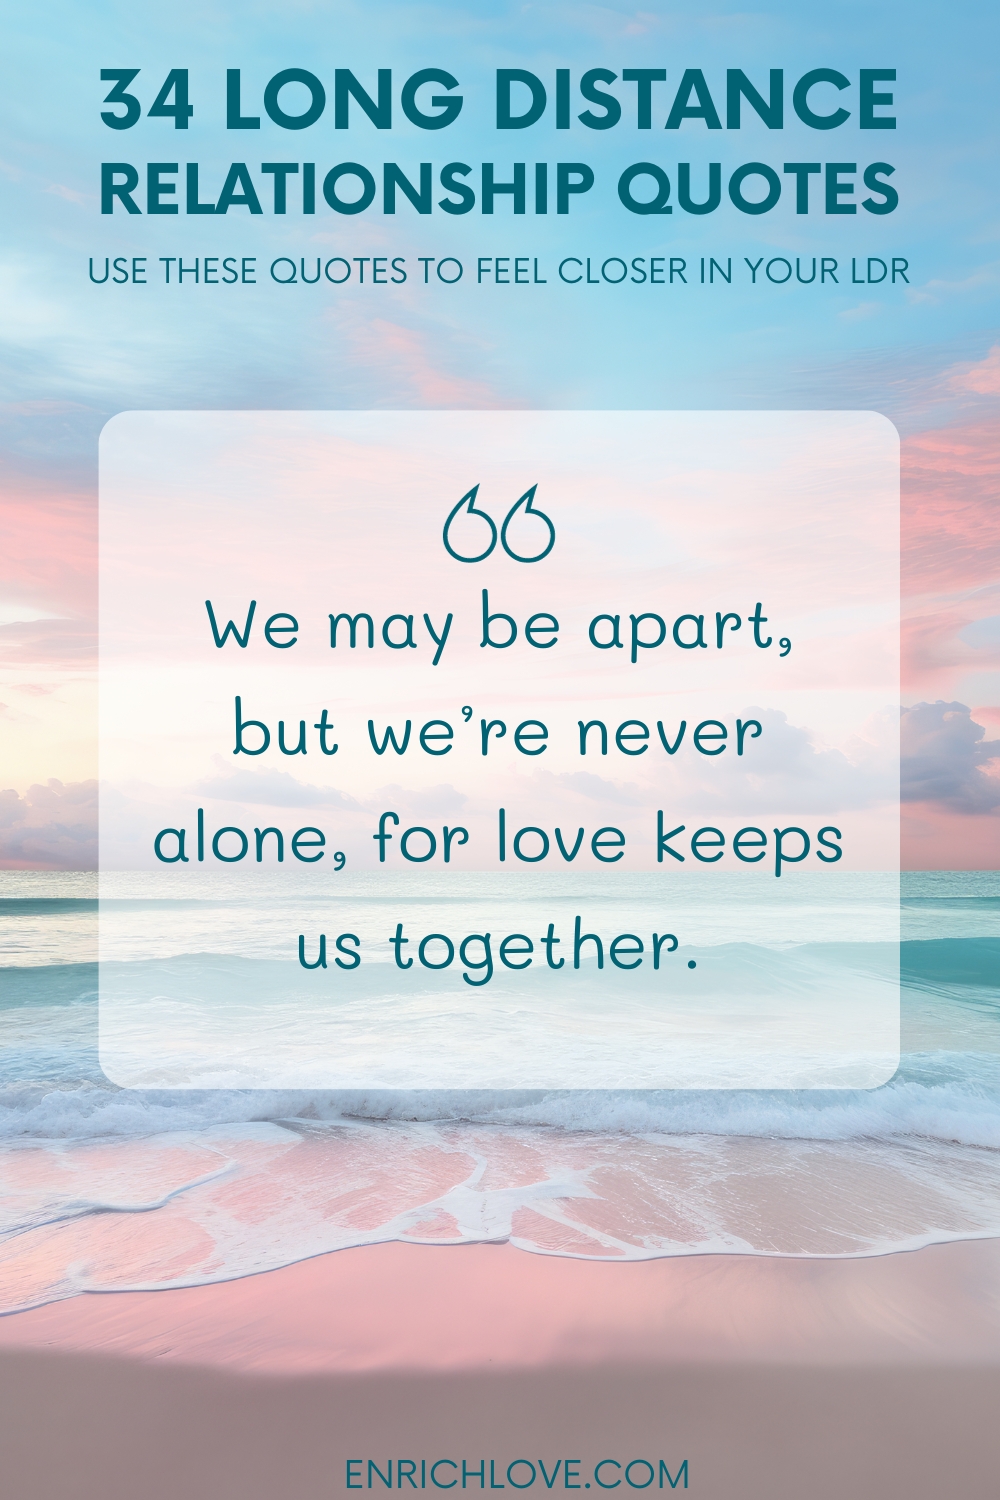 34 Long Distance Relationship Quotes - We may be apart, but we’re never alone, for love keeps us together.